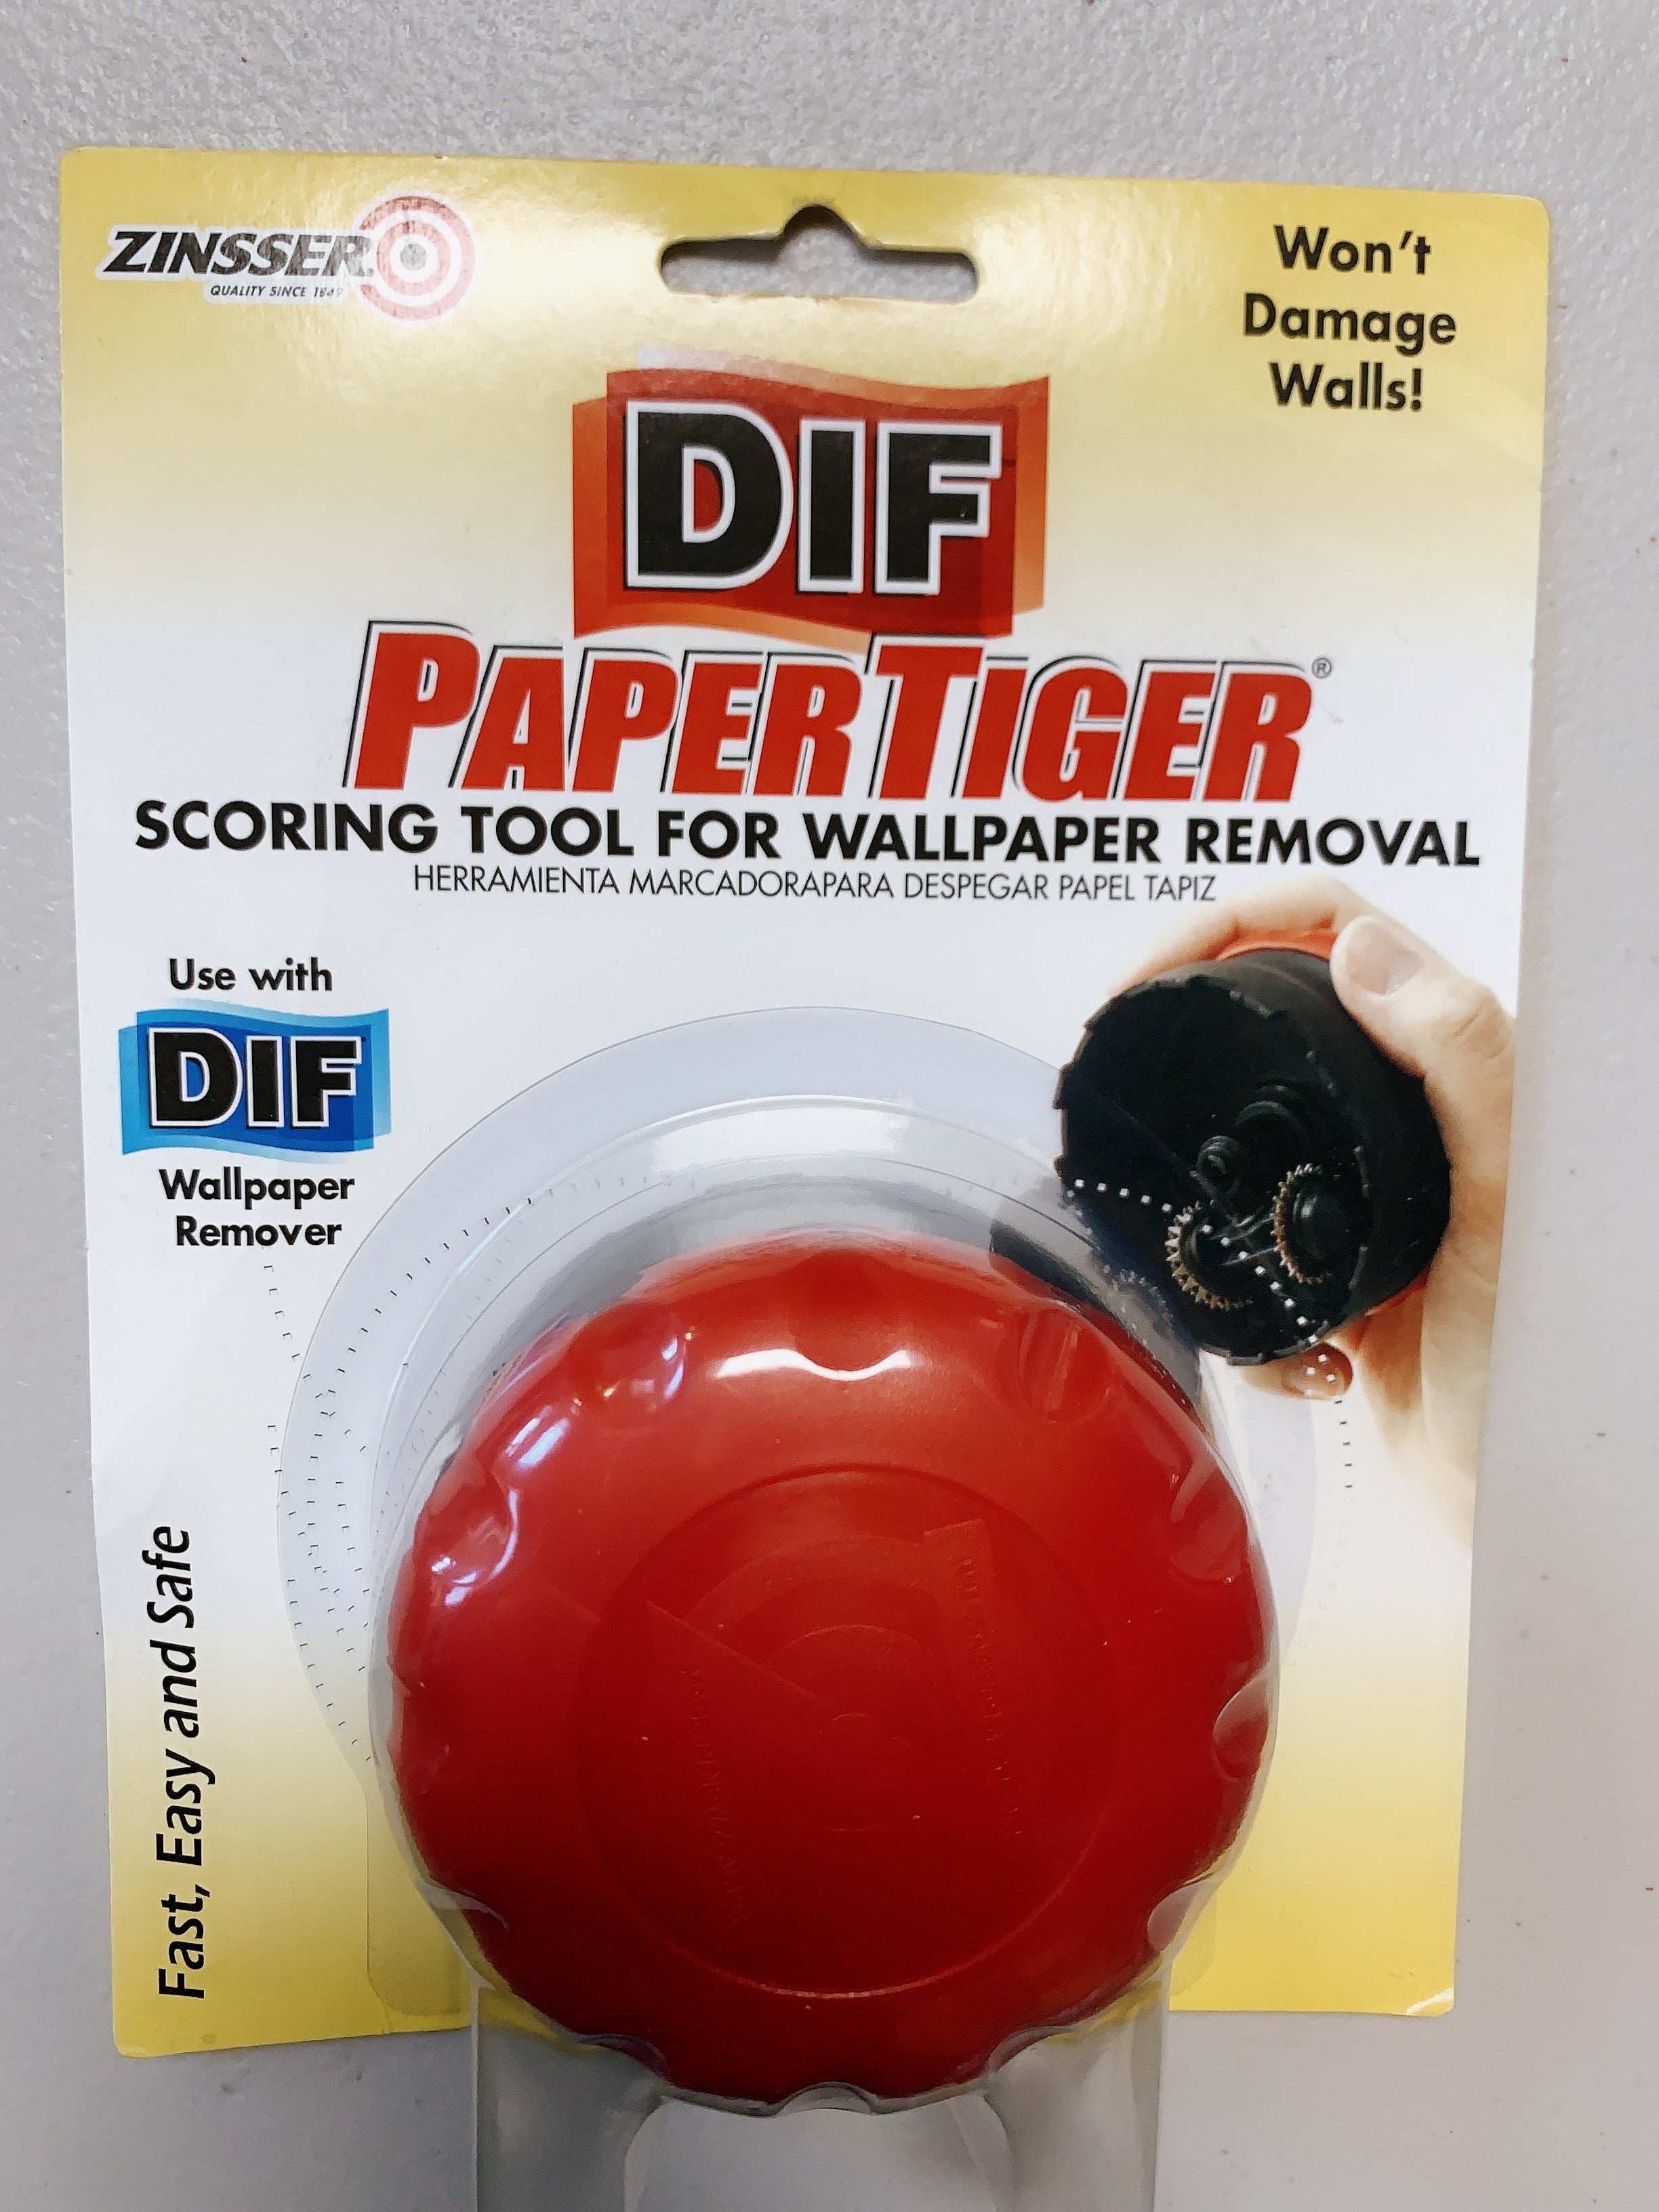 Use DIF to Remove Wallpaper 